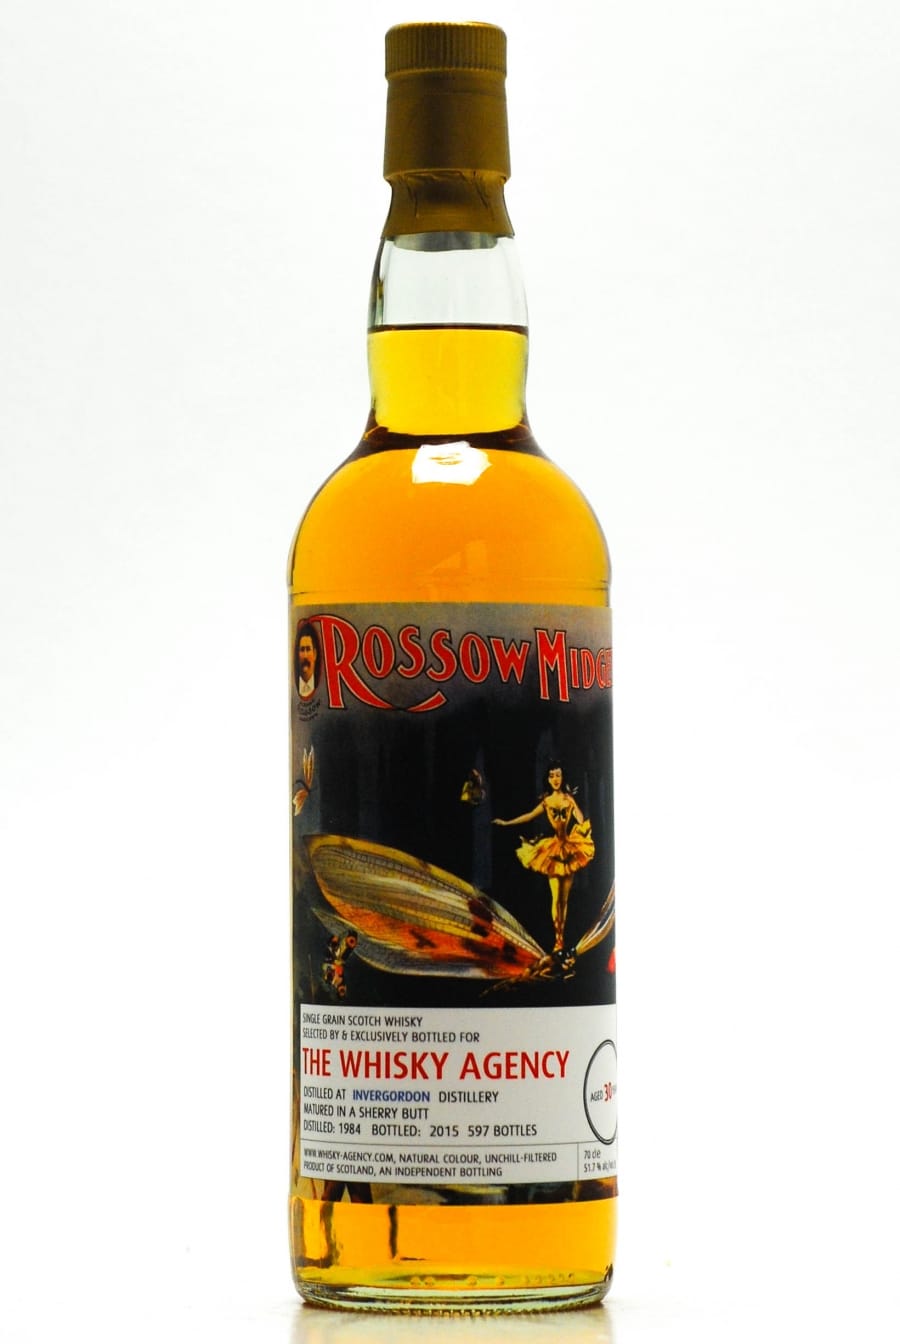 Invergordon - 30 Years Old The Whisky Agency Circus Joint bottling with The Nectar 51,7% 1984 Perfect